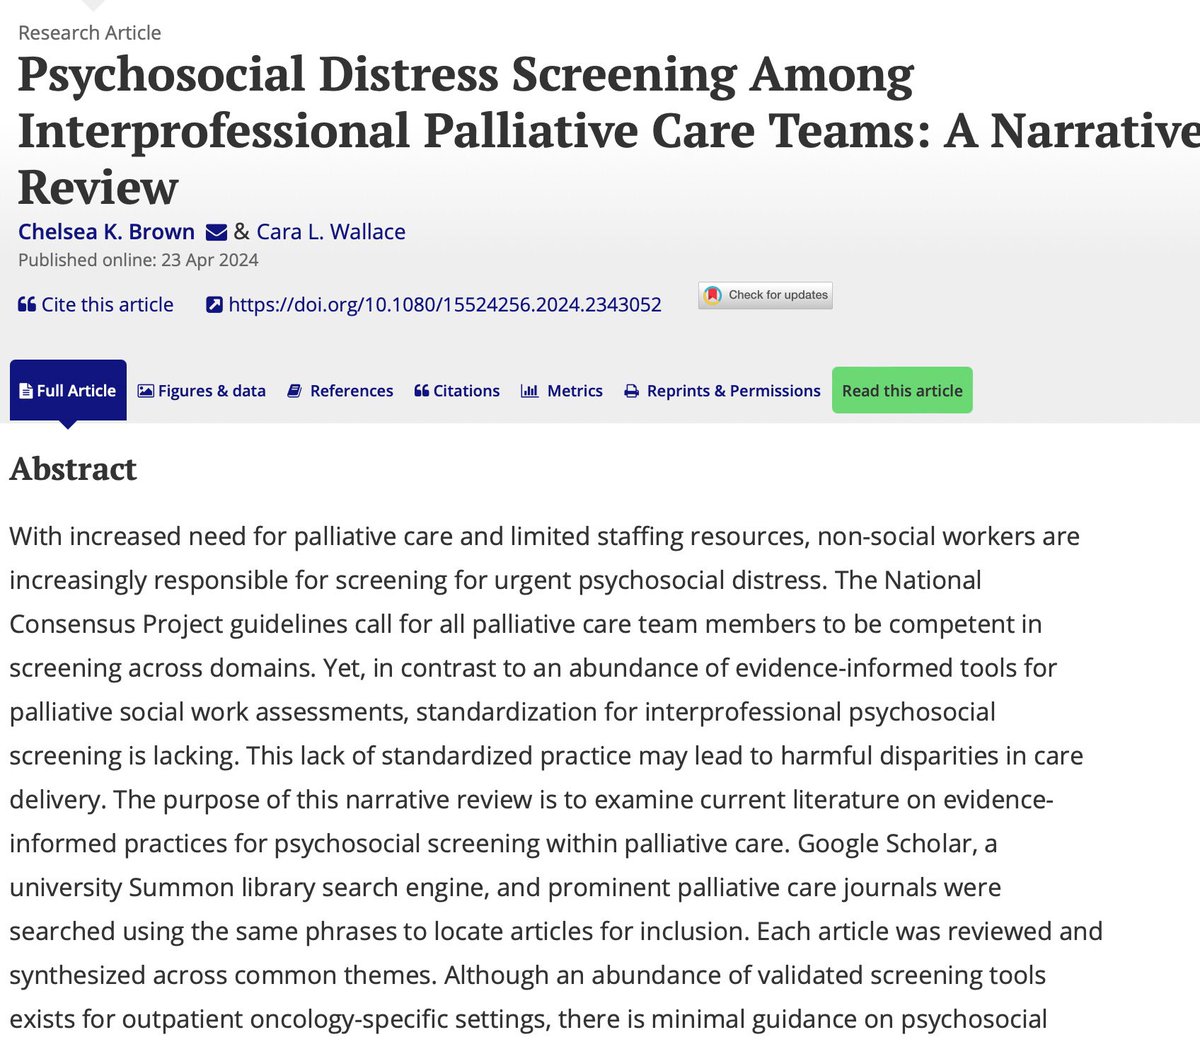 New publication alert: 'Psychosocial Distress Screening Among Interprofessional Palliative Care Teams: A Narrative Review,' by PhD student @ChelseakBrown highlights the urgent need for standardized psychosocial screening tools to prevent disparities in palliative care.